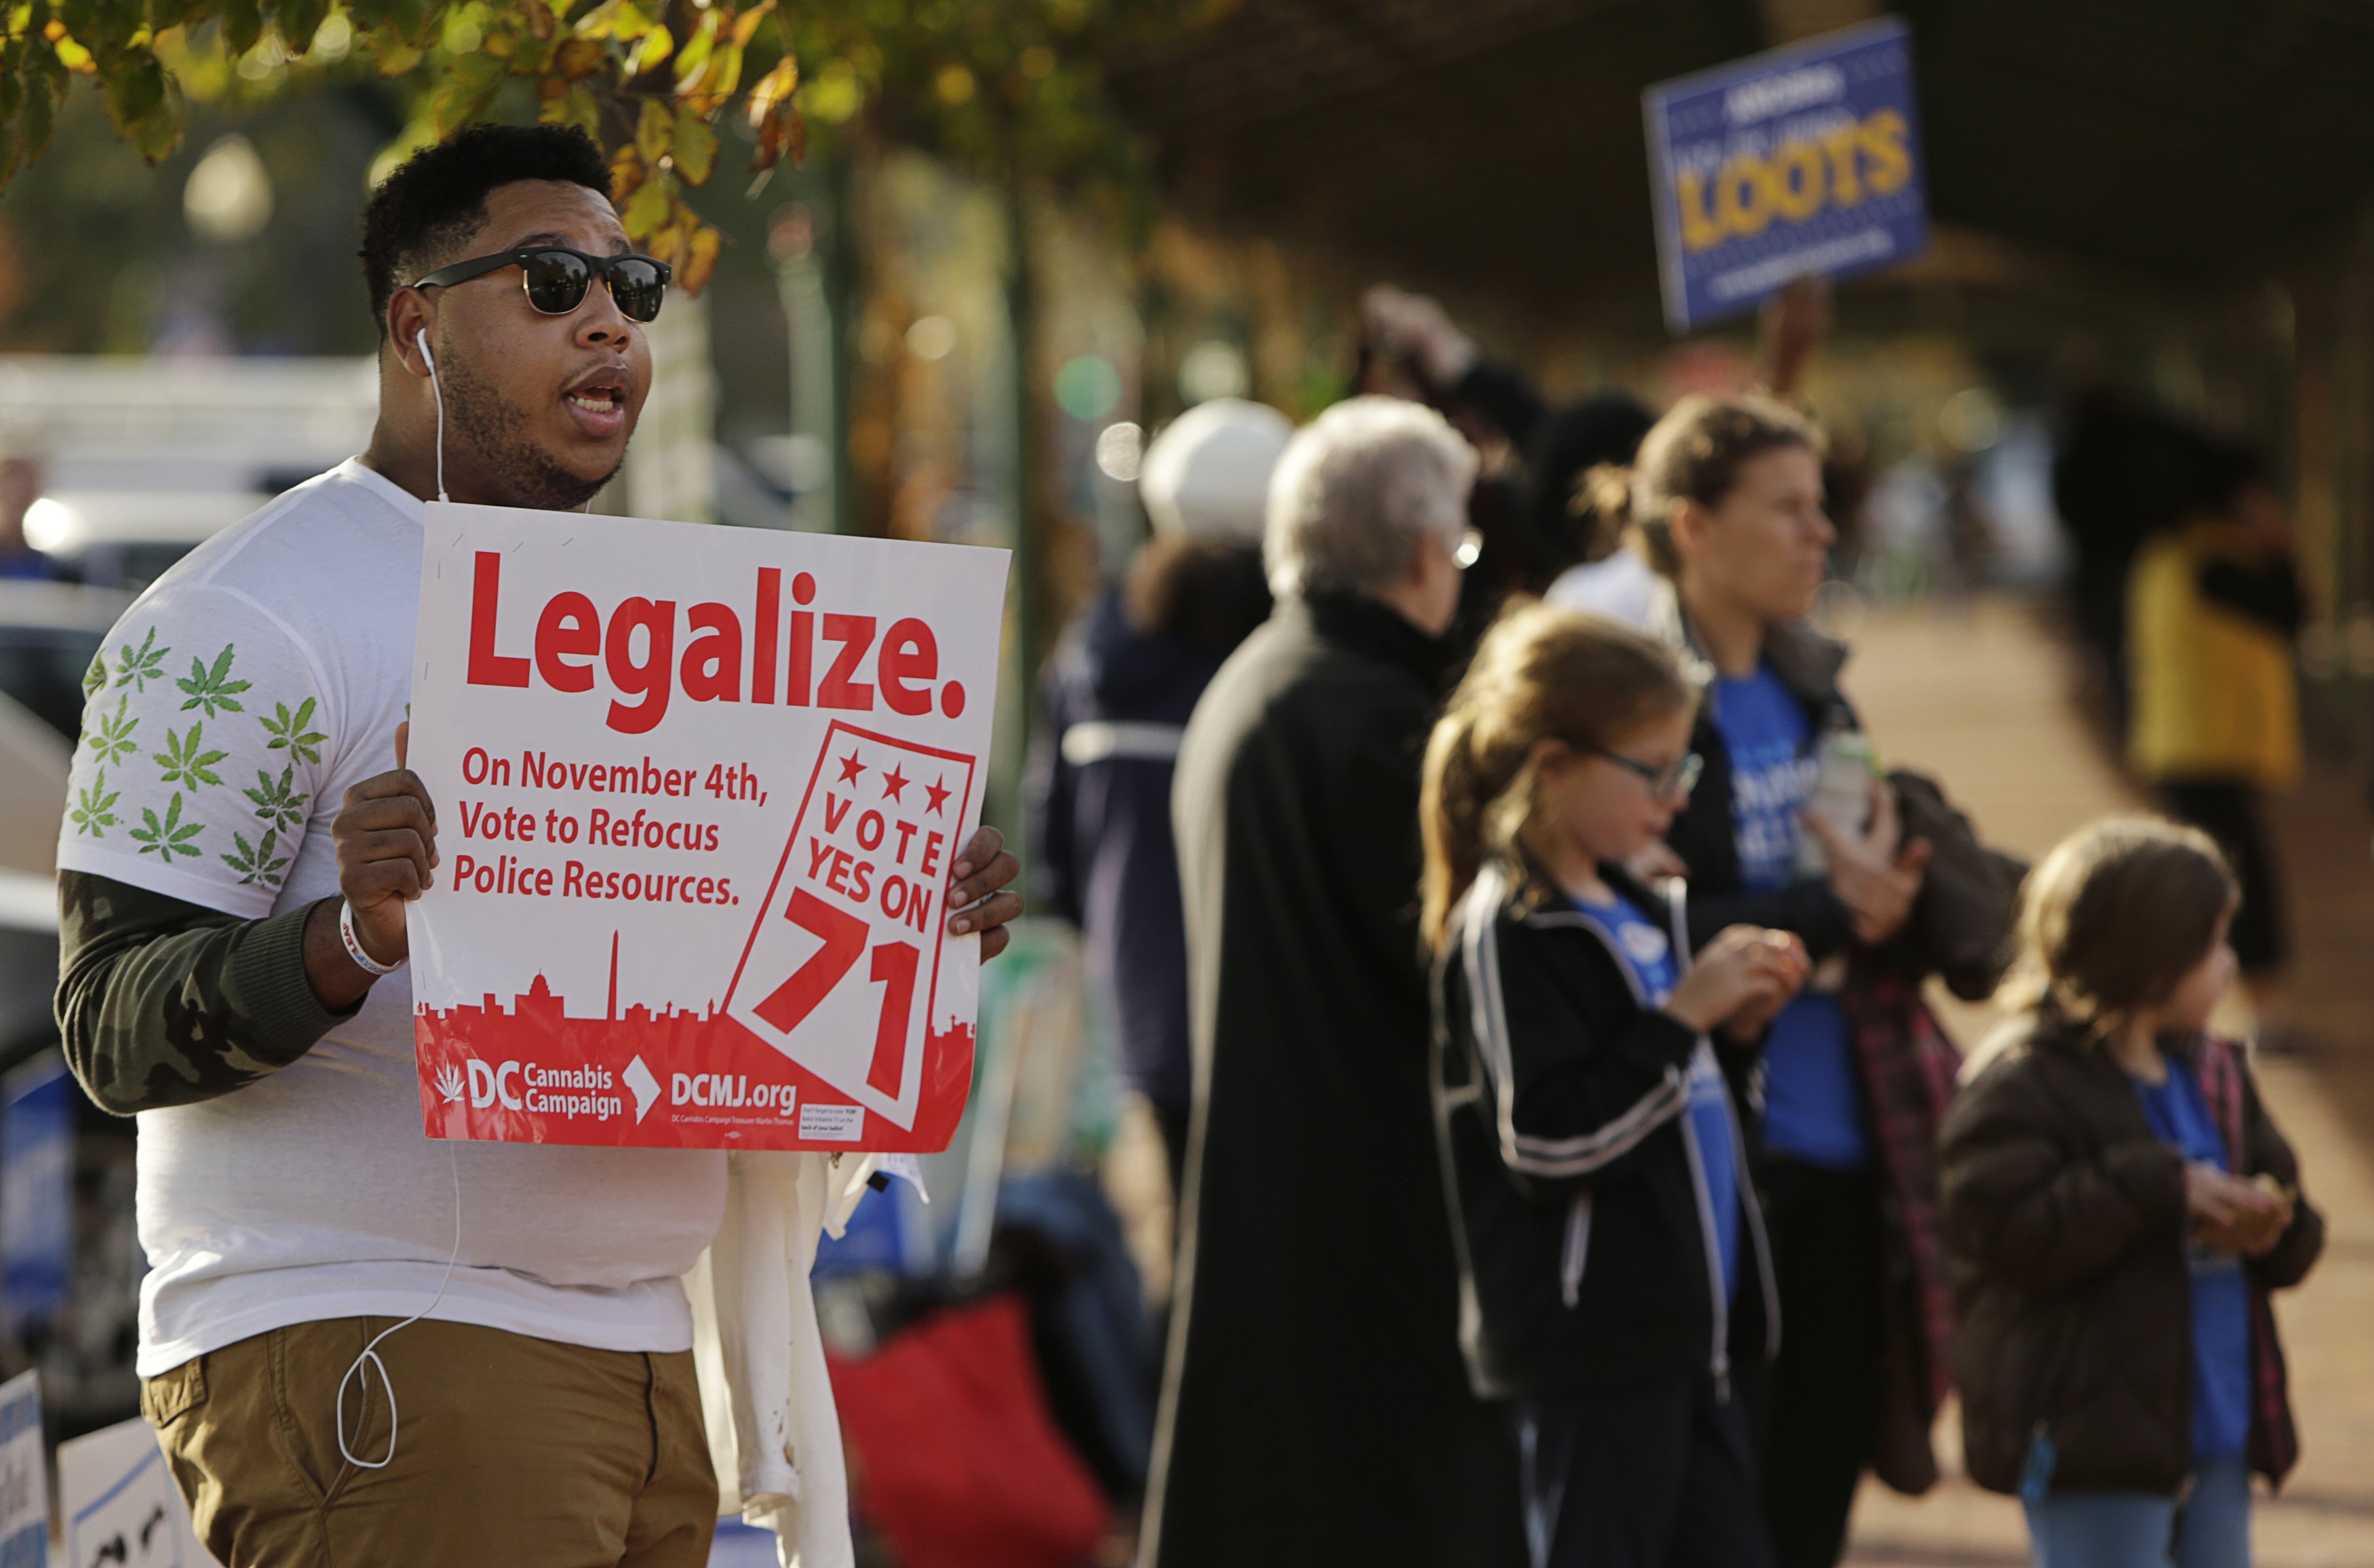 Melvin Clay of the DC Cannabis Campaign holds a sign urging voters to ...